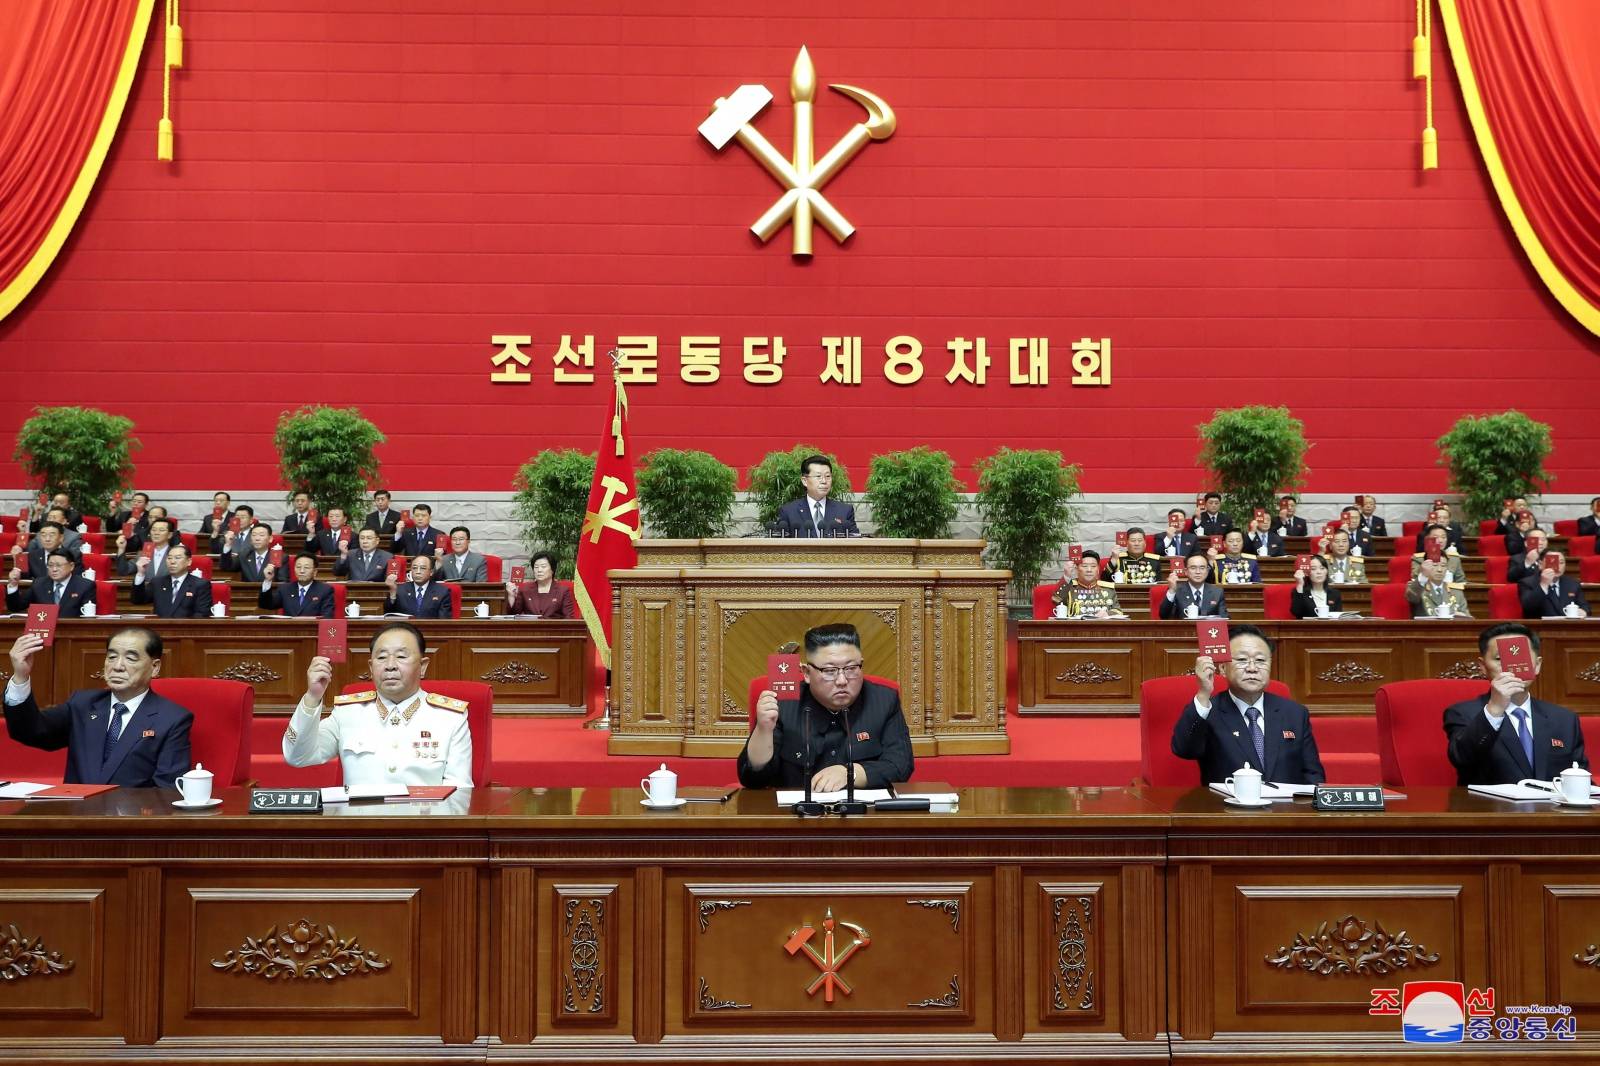 North Korean leader Kim Jong Un attends the Workers' Party congress in Pyongyang